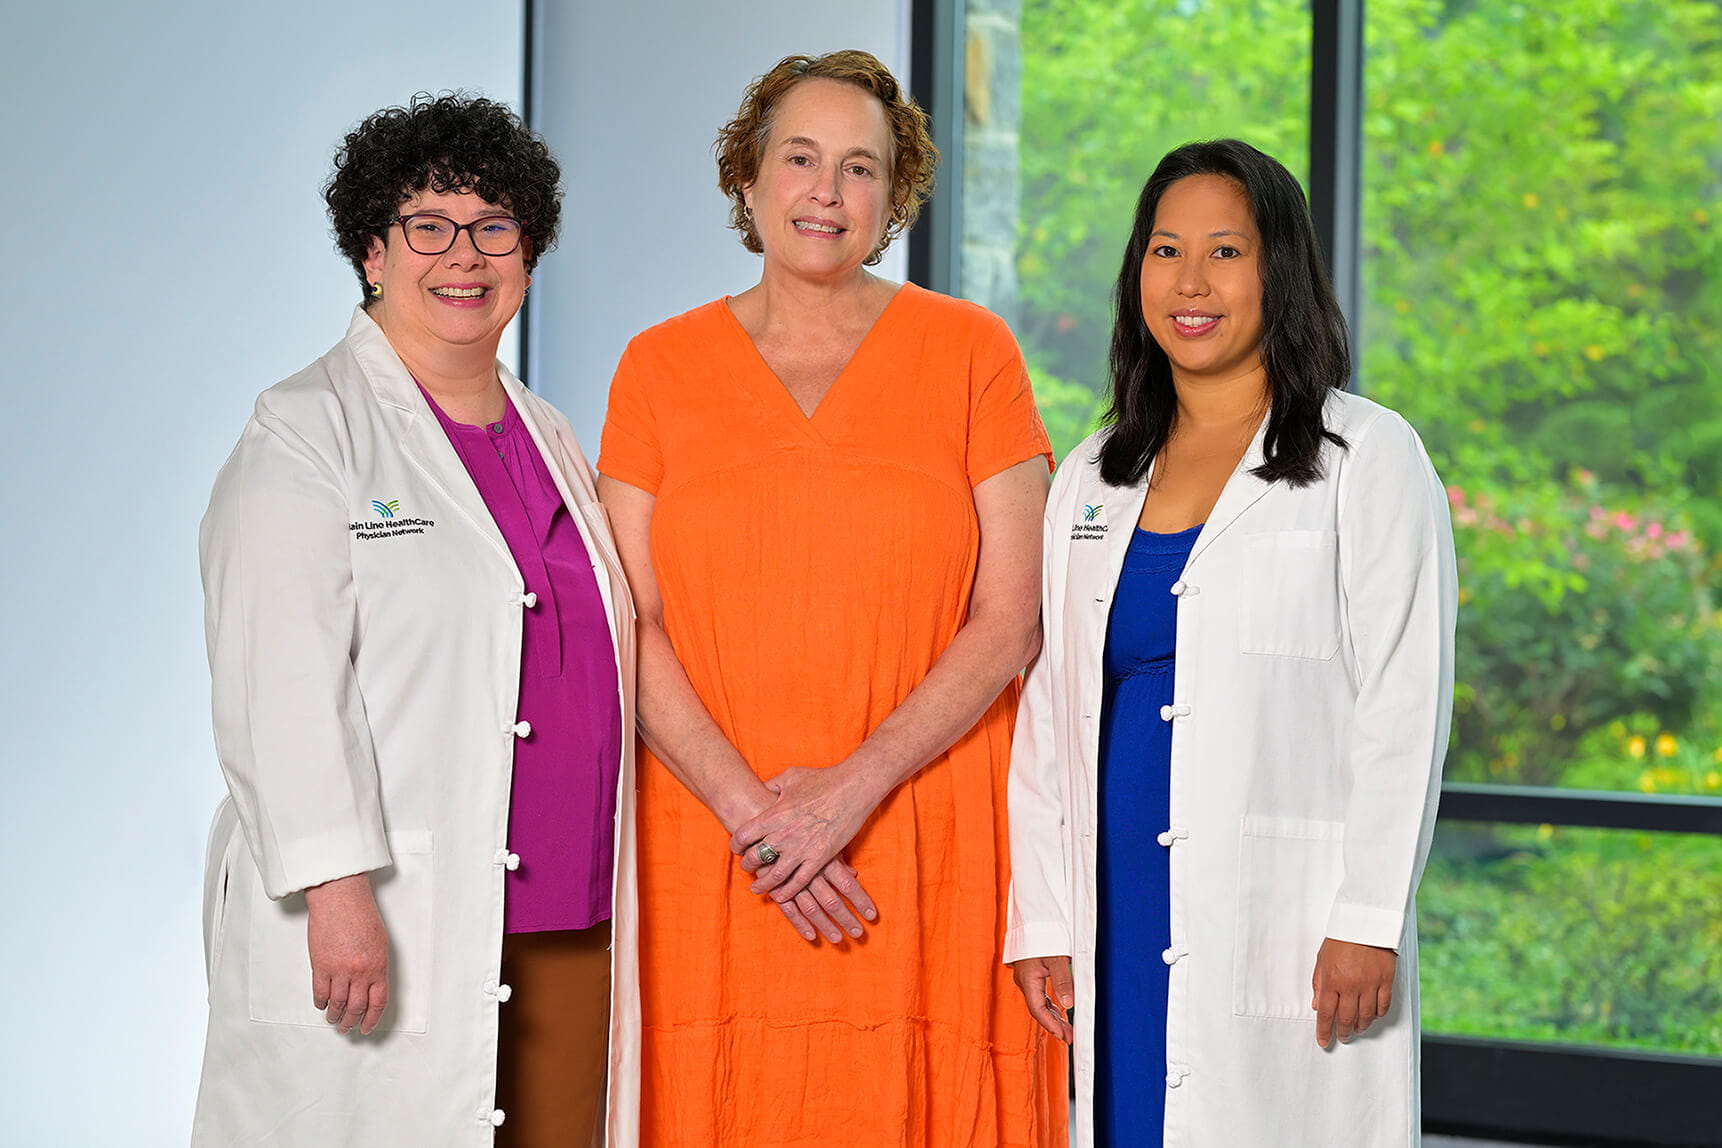 Left to right: Rebecca Stern, CRNP; Amy Nathans, CNM and Nicole Salva, MD